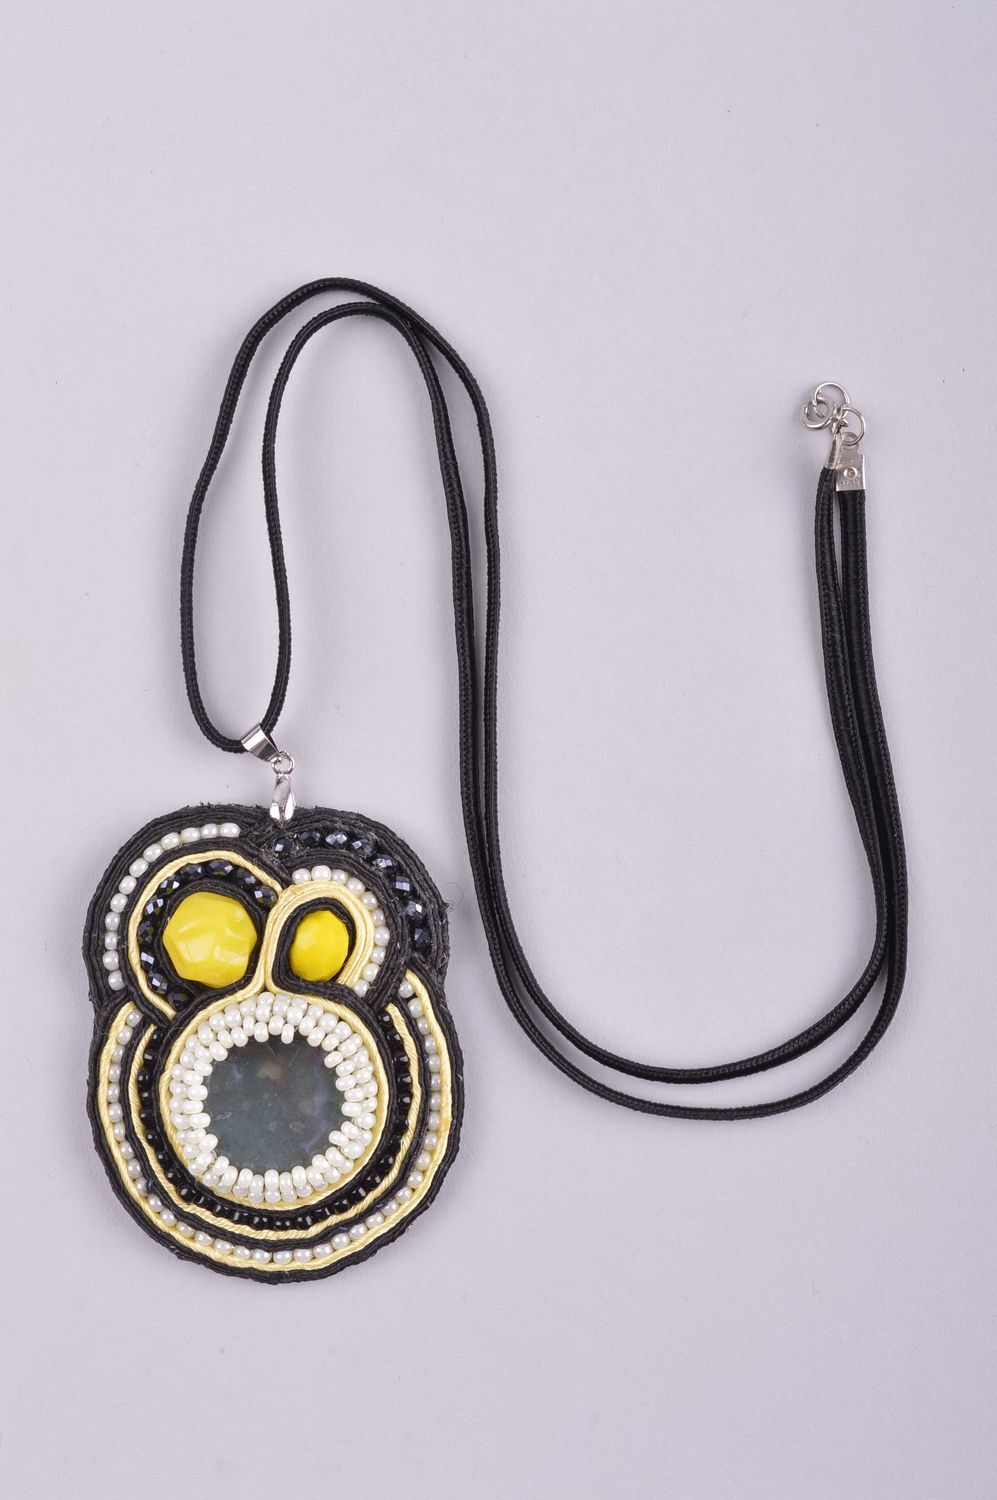 Unusual handmade textile necklace soutache jewelry designs gifts for her photo 2